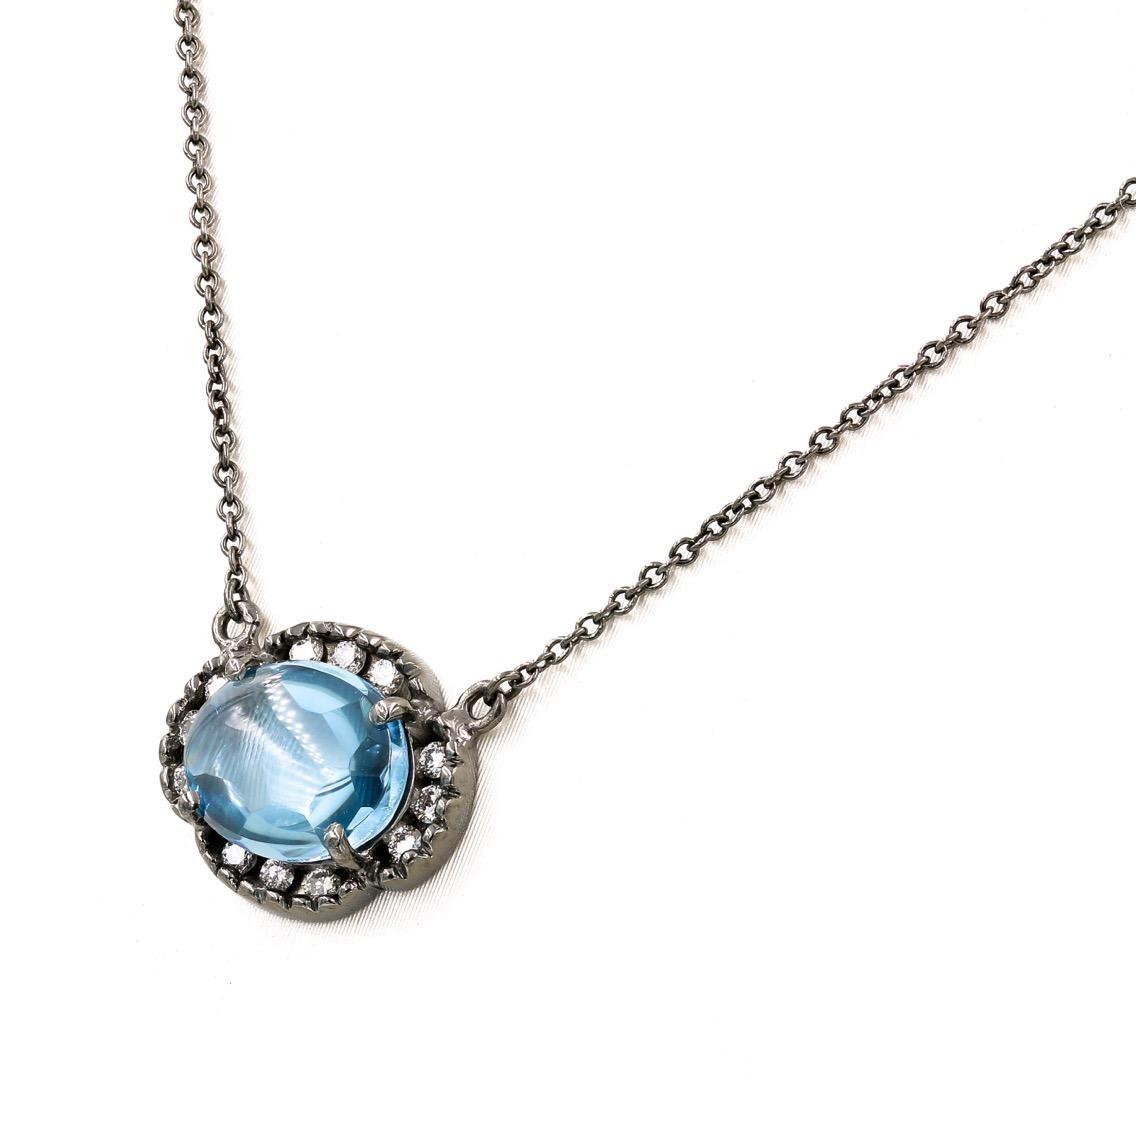 Contemporary Oval Cut Cabochon Blue Topaz and Round Diamond Necklace